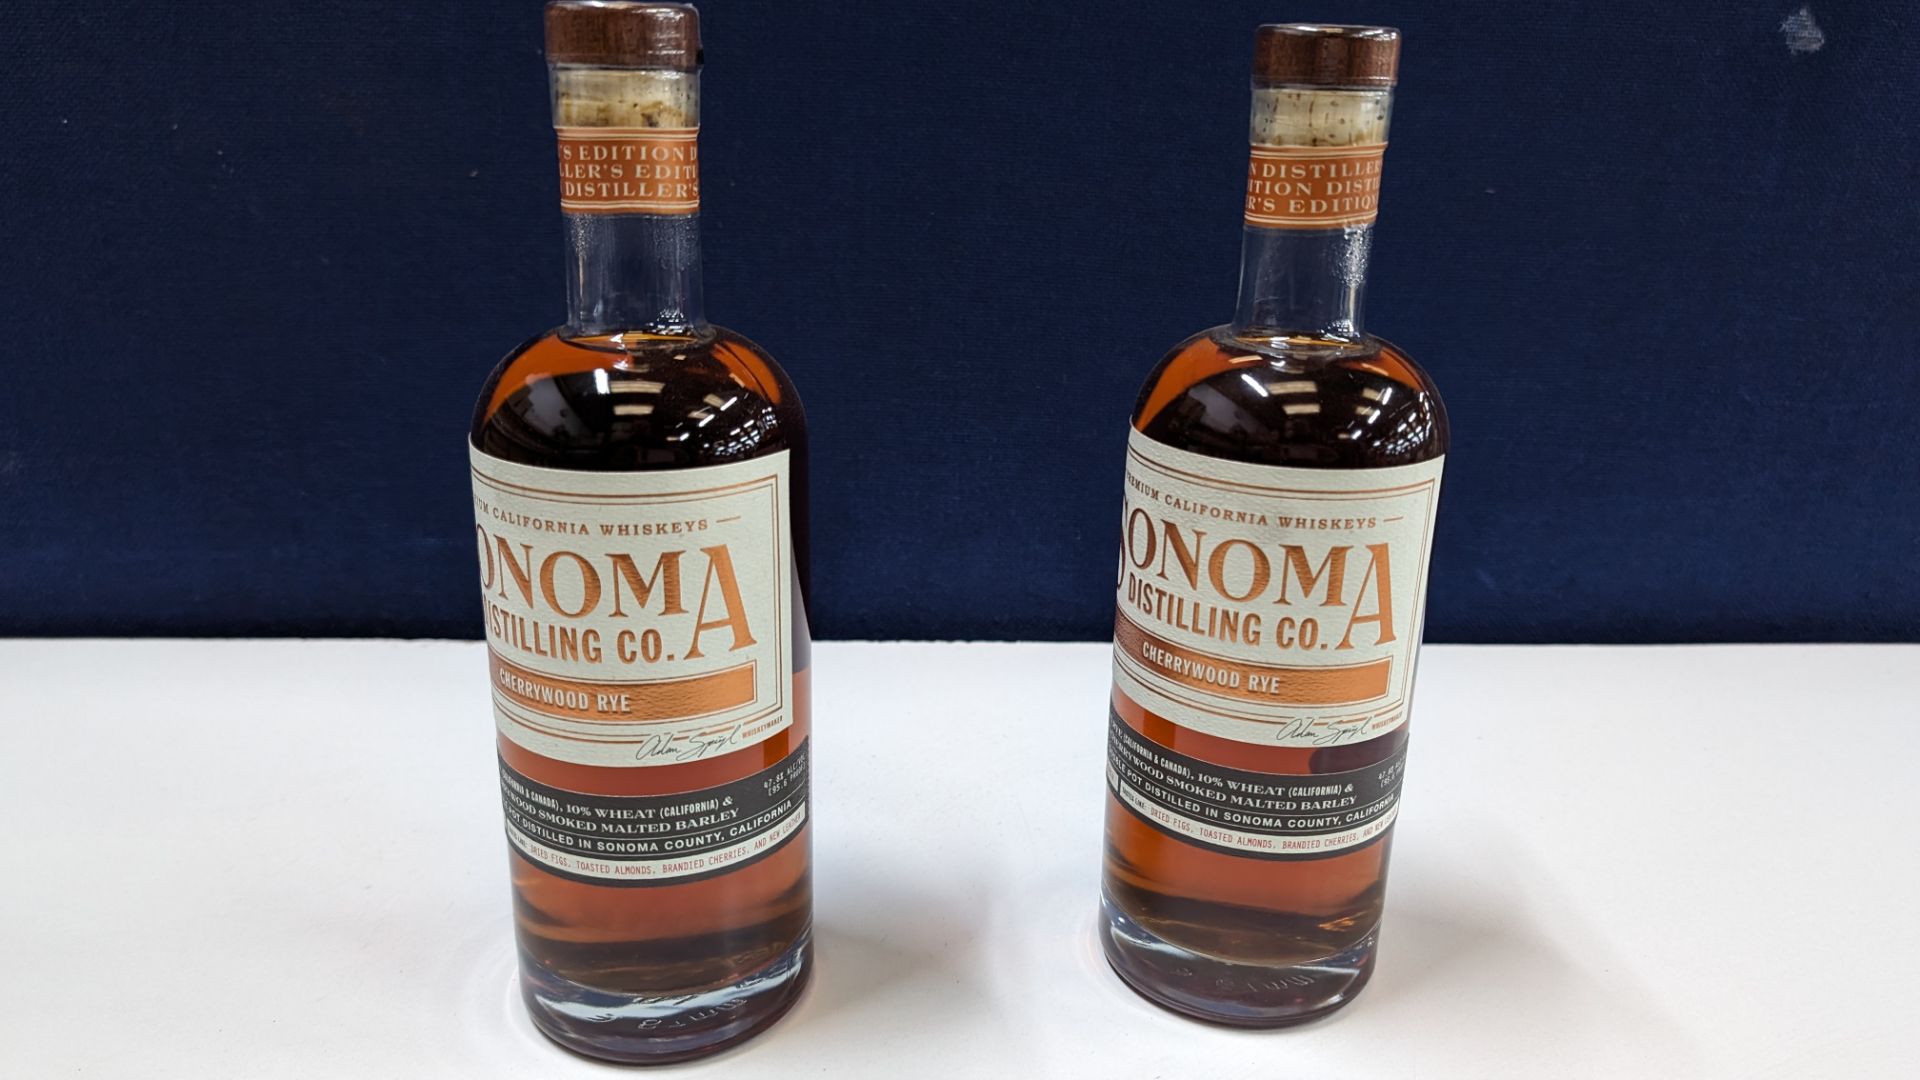 2 off 700ml bottles of Sonoma Cherrywood Rye Whiskey. 47.8% alc/vol (95.6 proof). Distilled and bo - Image 2 of 6